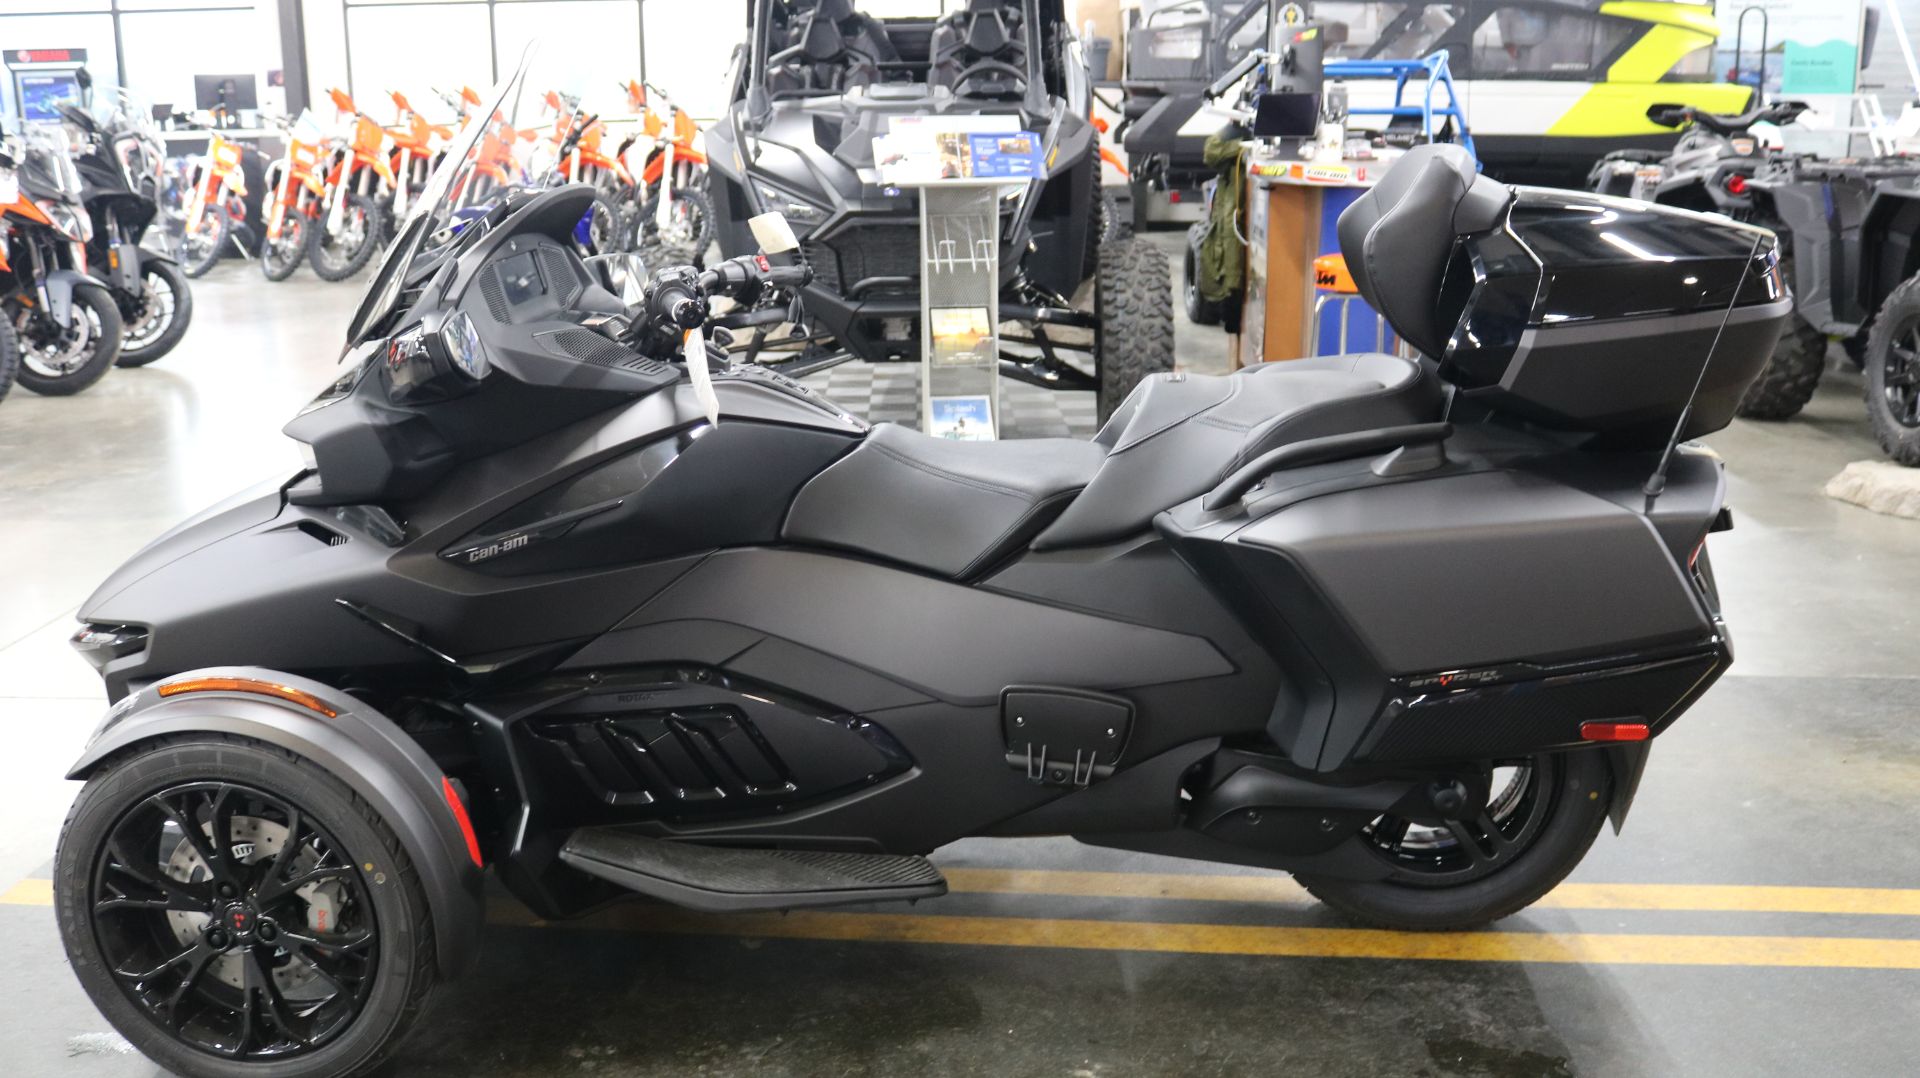 2023 Can-Am Spyder RT Limited in Grimes, Iowa - Photo 6